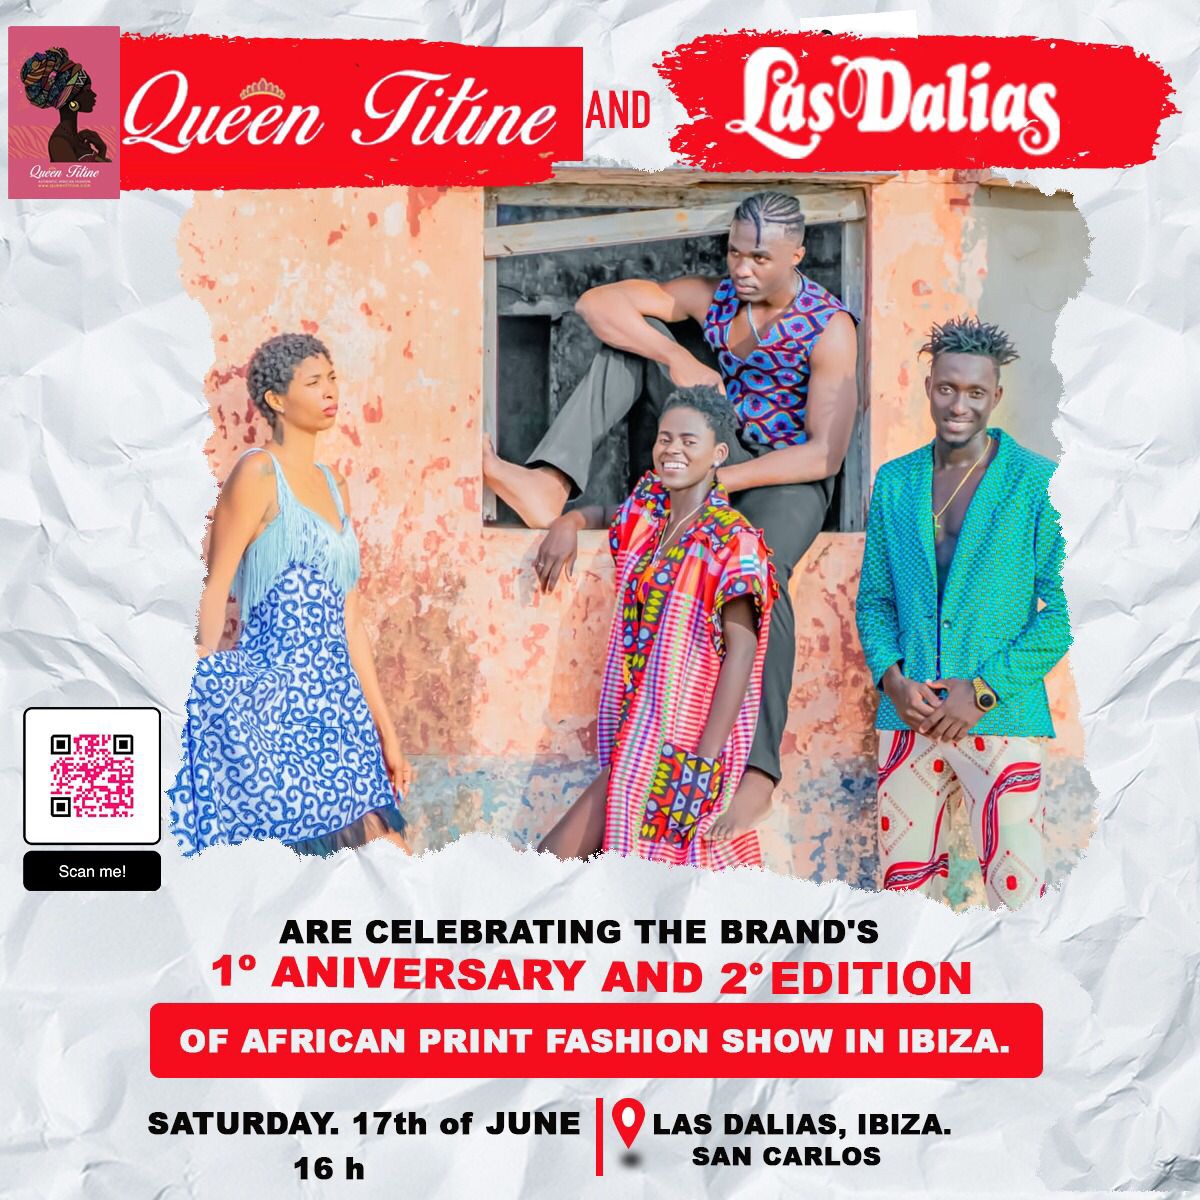 Queen Titine celebrates the first anniversary of the brand in Las Dalias with a great Fashion show